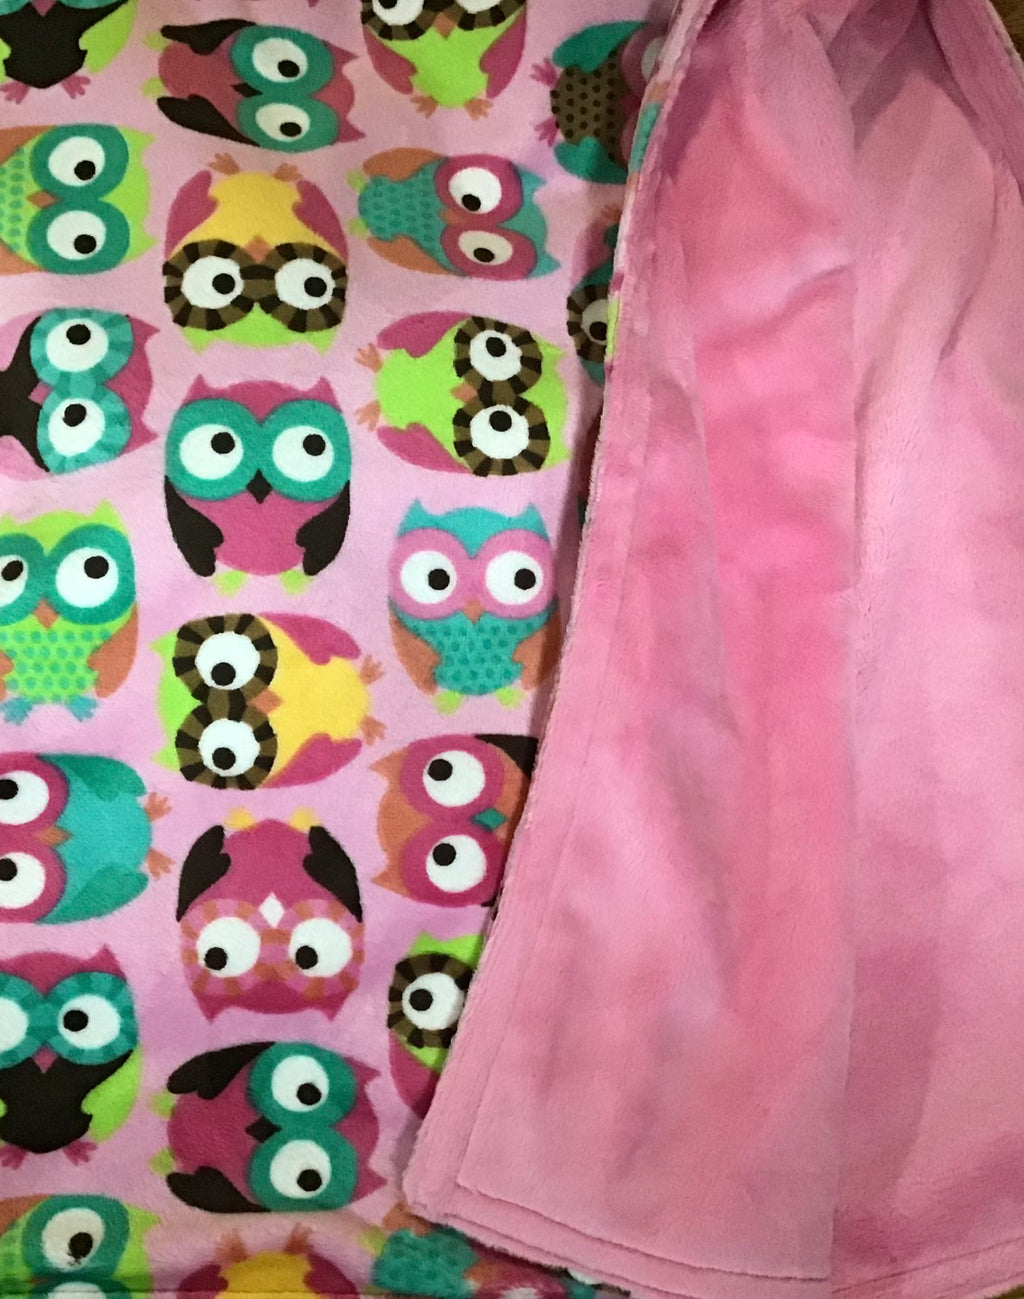 CHRIS' CREATIONS: Baby Cuddle Blanket #34 Owls-Pink